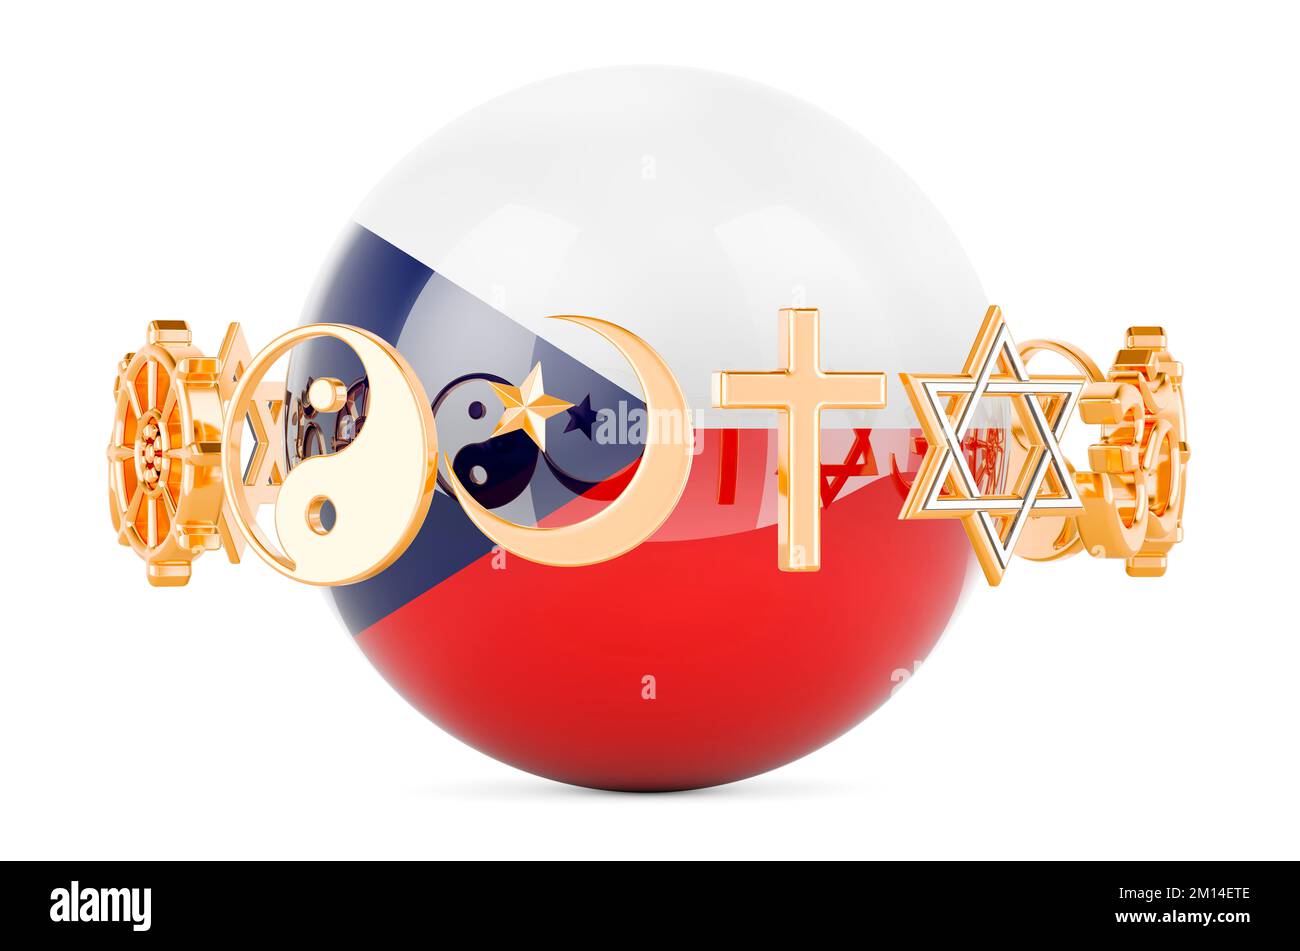 Czech flag painted on sphere with religions symbols around, 3D rendering isolated on white background Stock Photo